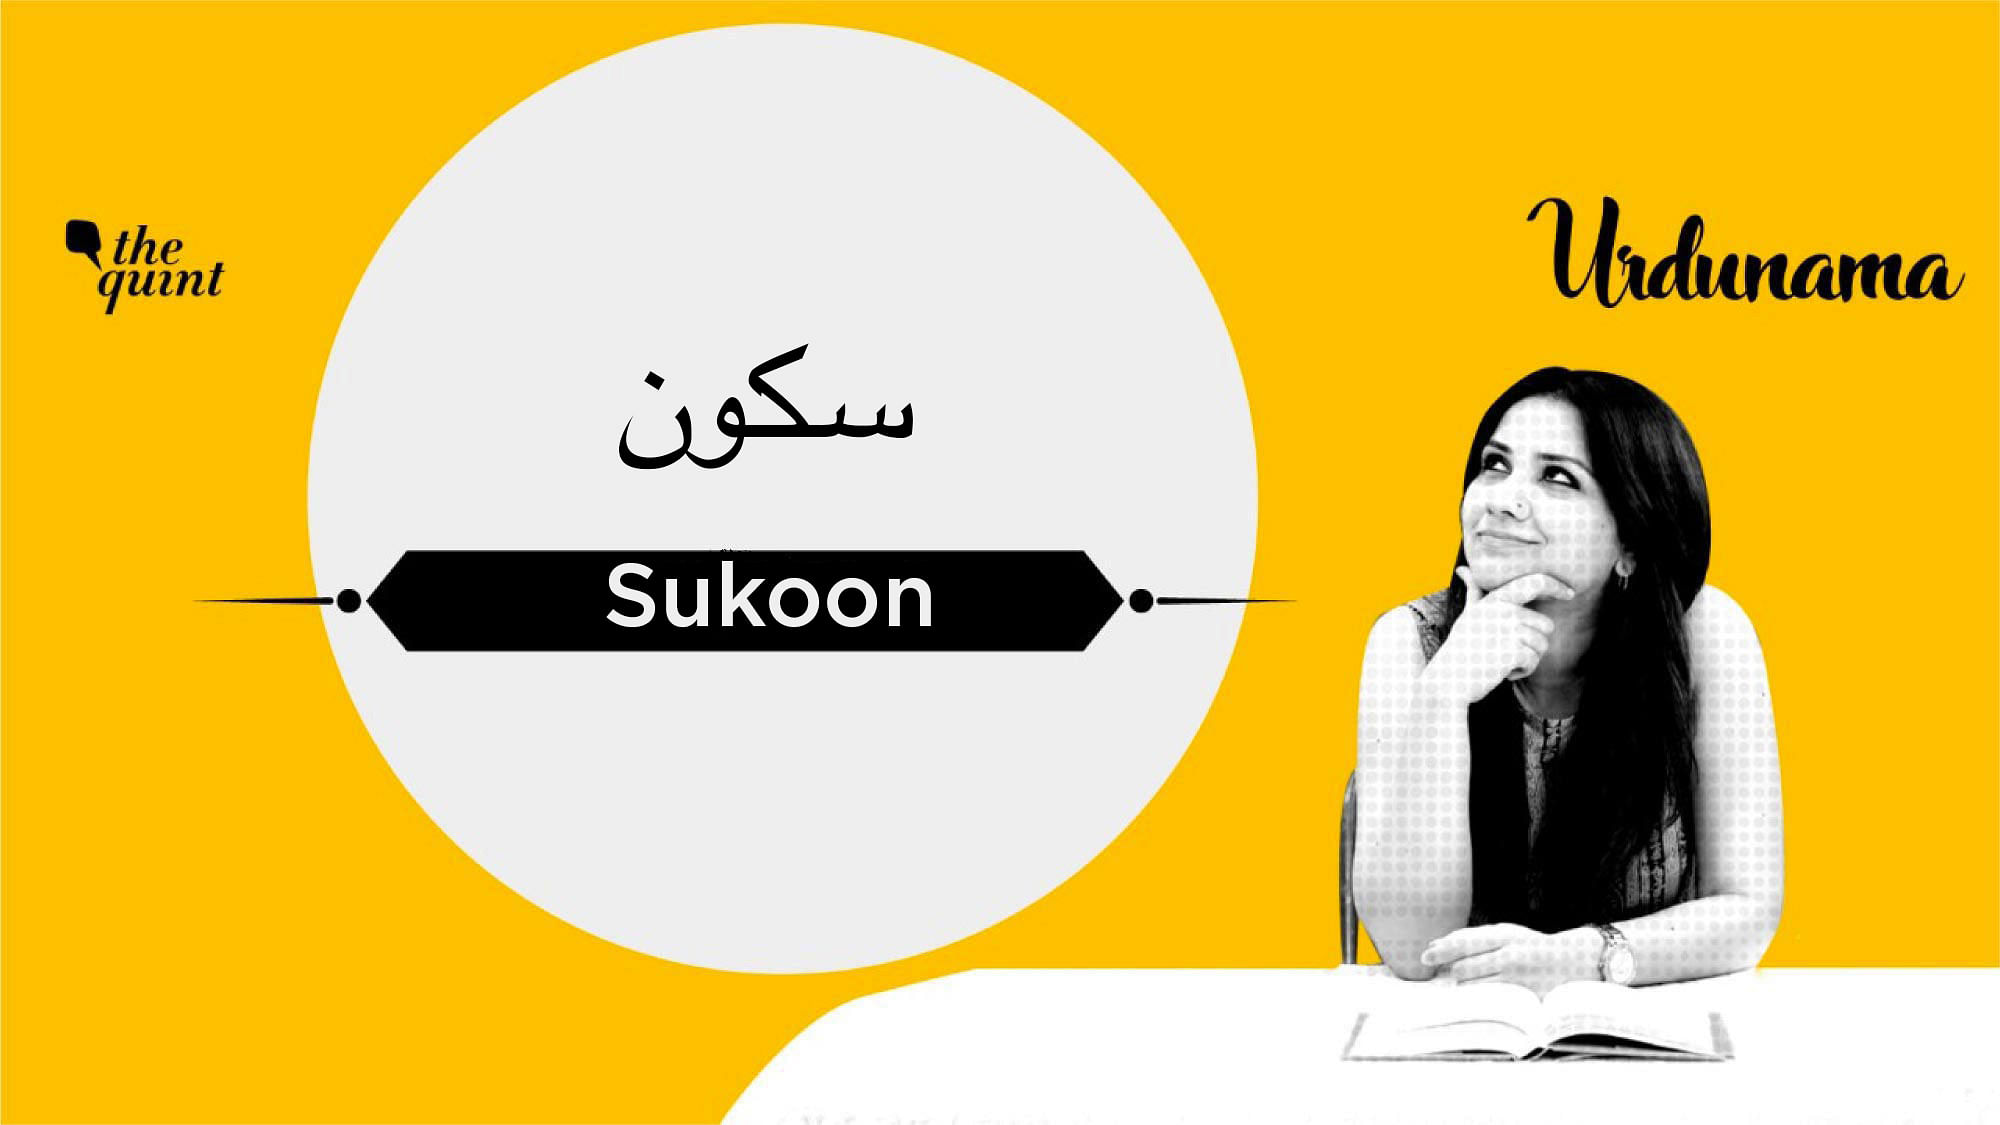 Sukoon means tranquility, a sense of inner calm and peace 